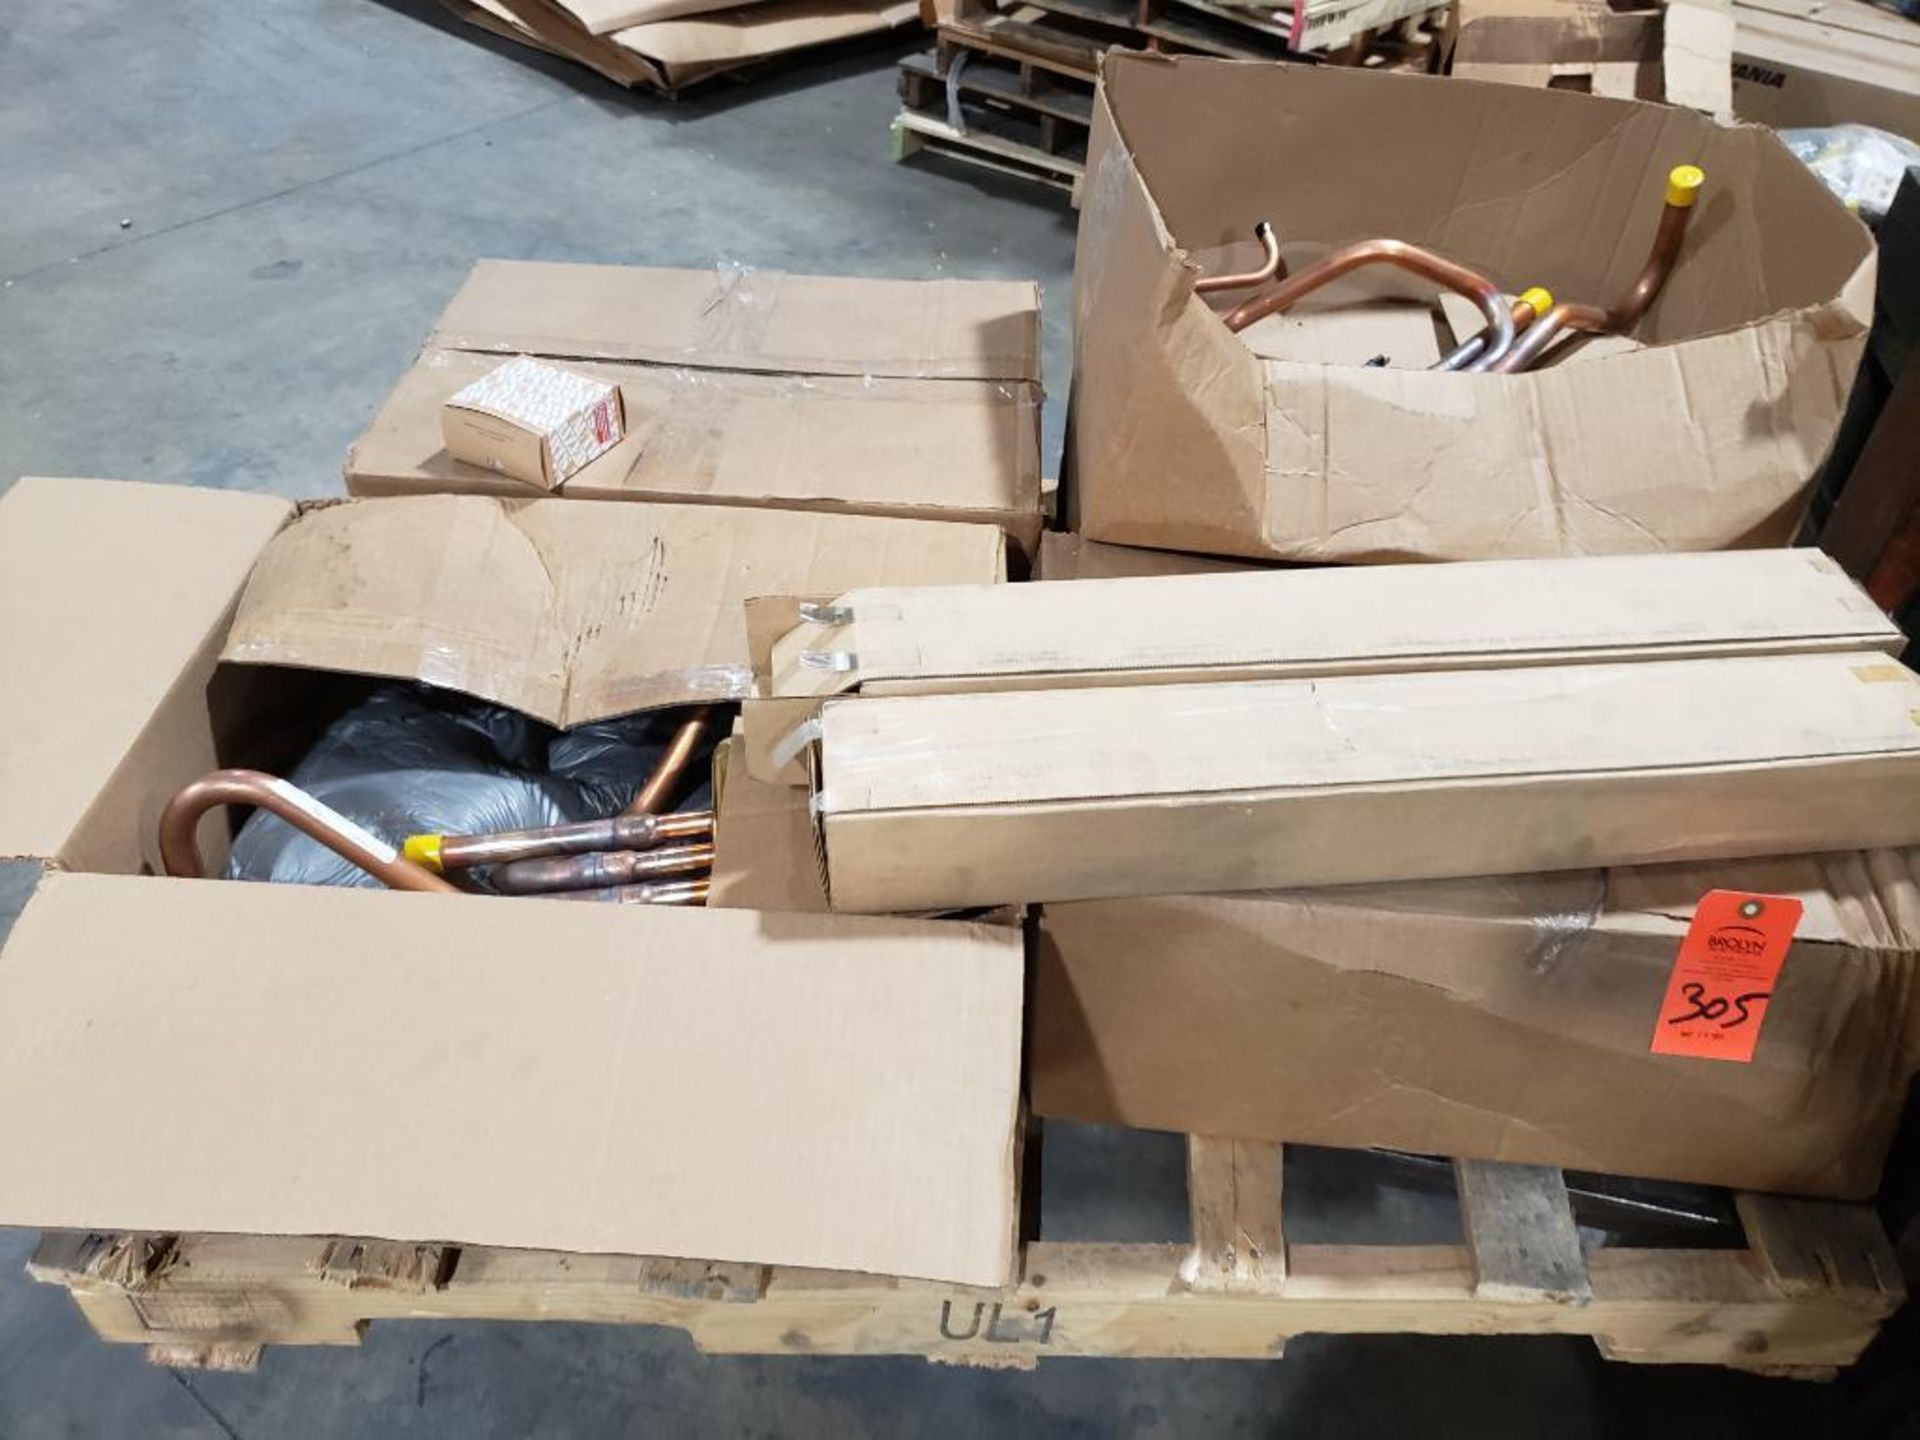 Pallet of assorted hardware and parts. Copper valve manifolds, etc.